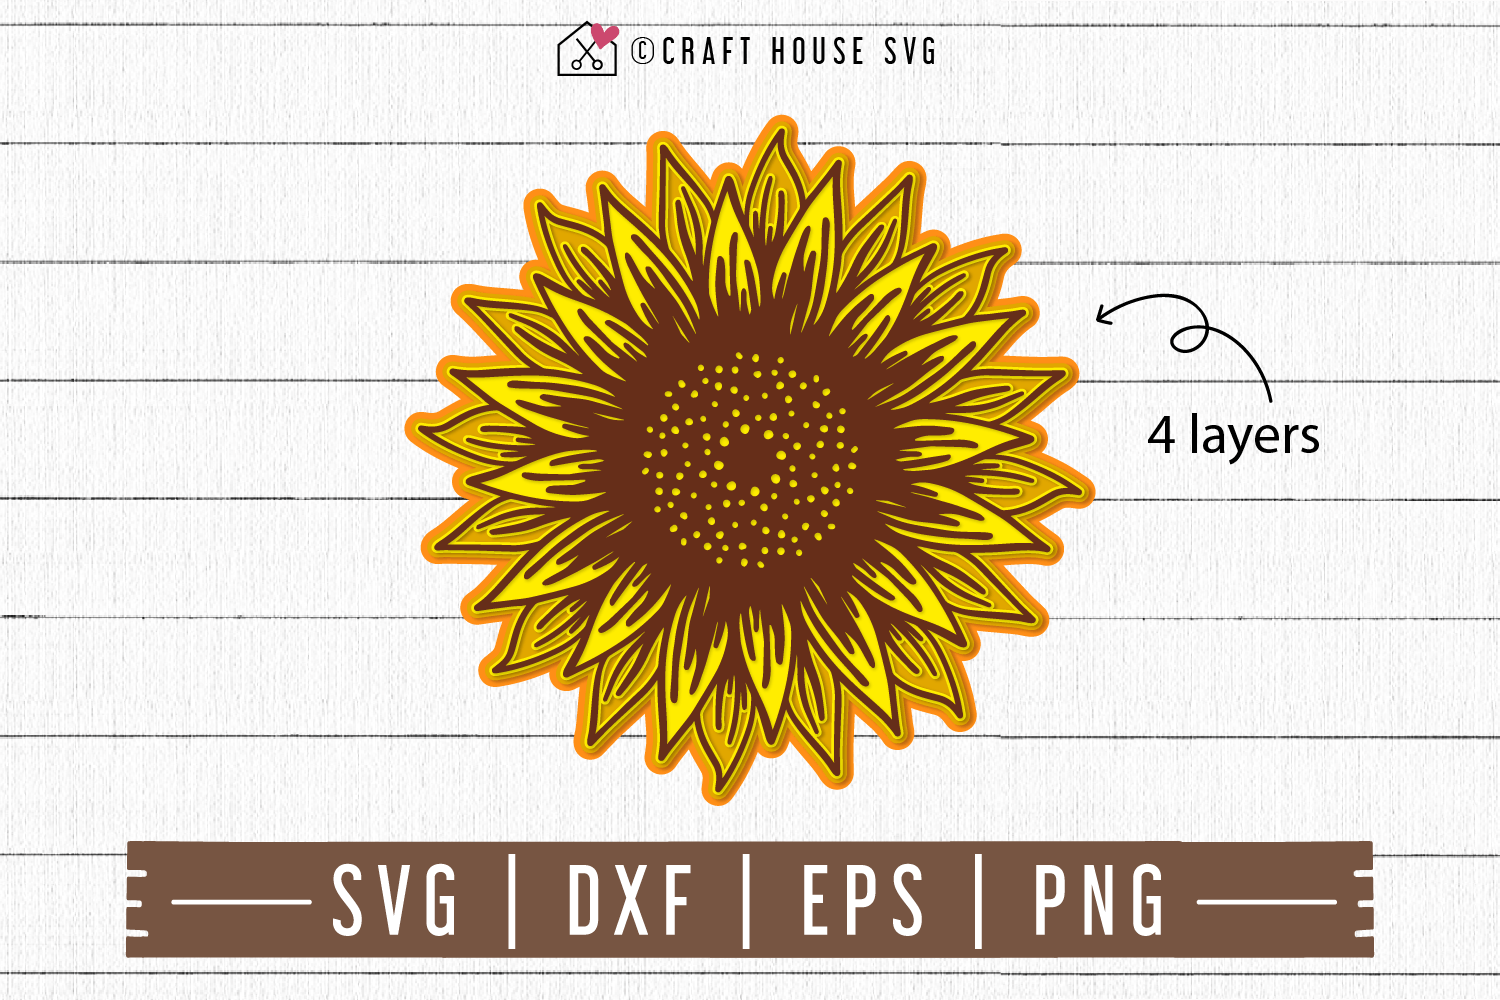 3D Layered Sunflower SVG Craft House SVG - SVG files for Cricut and Silhouette